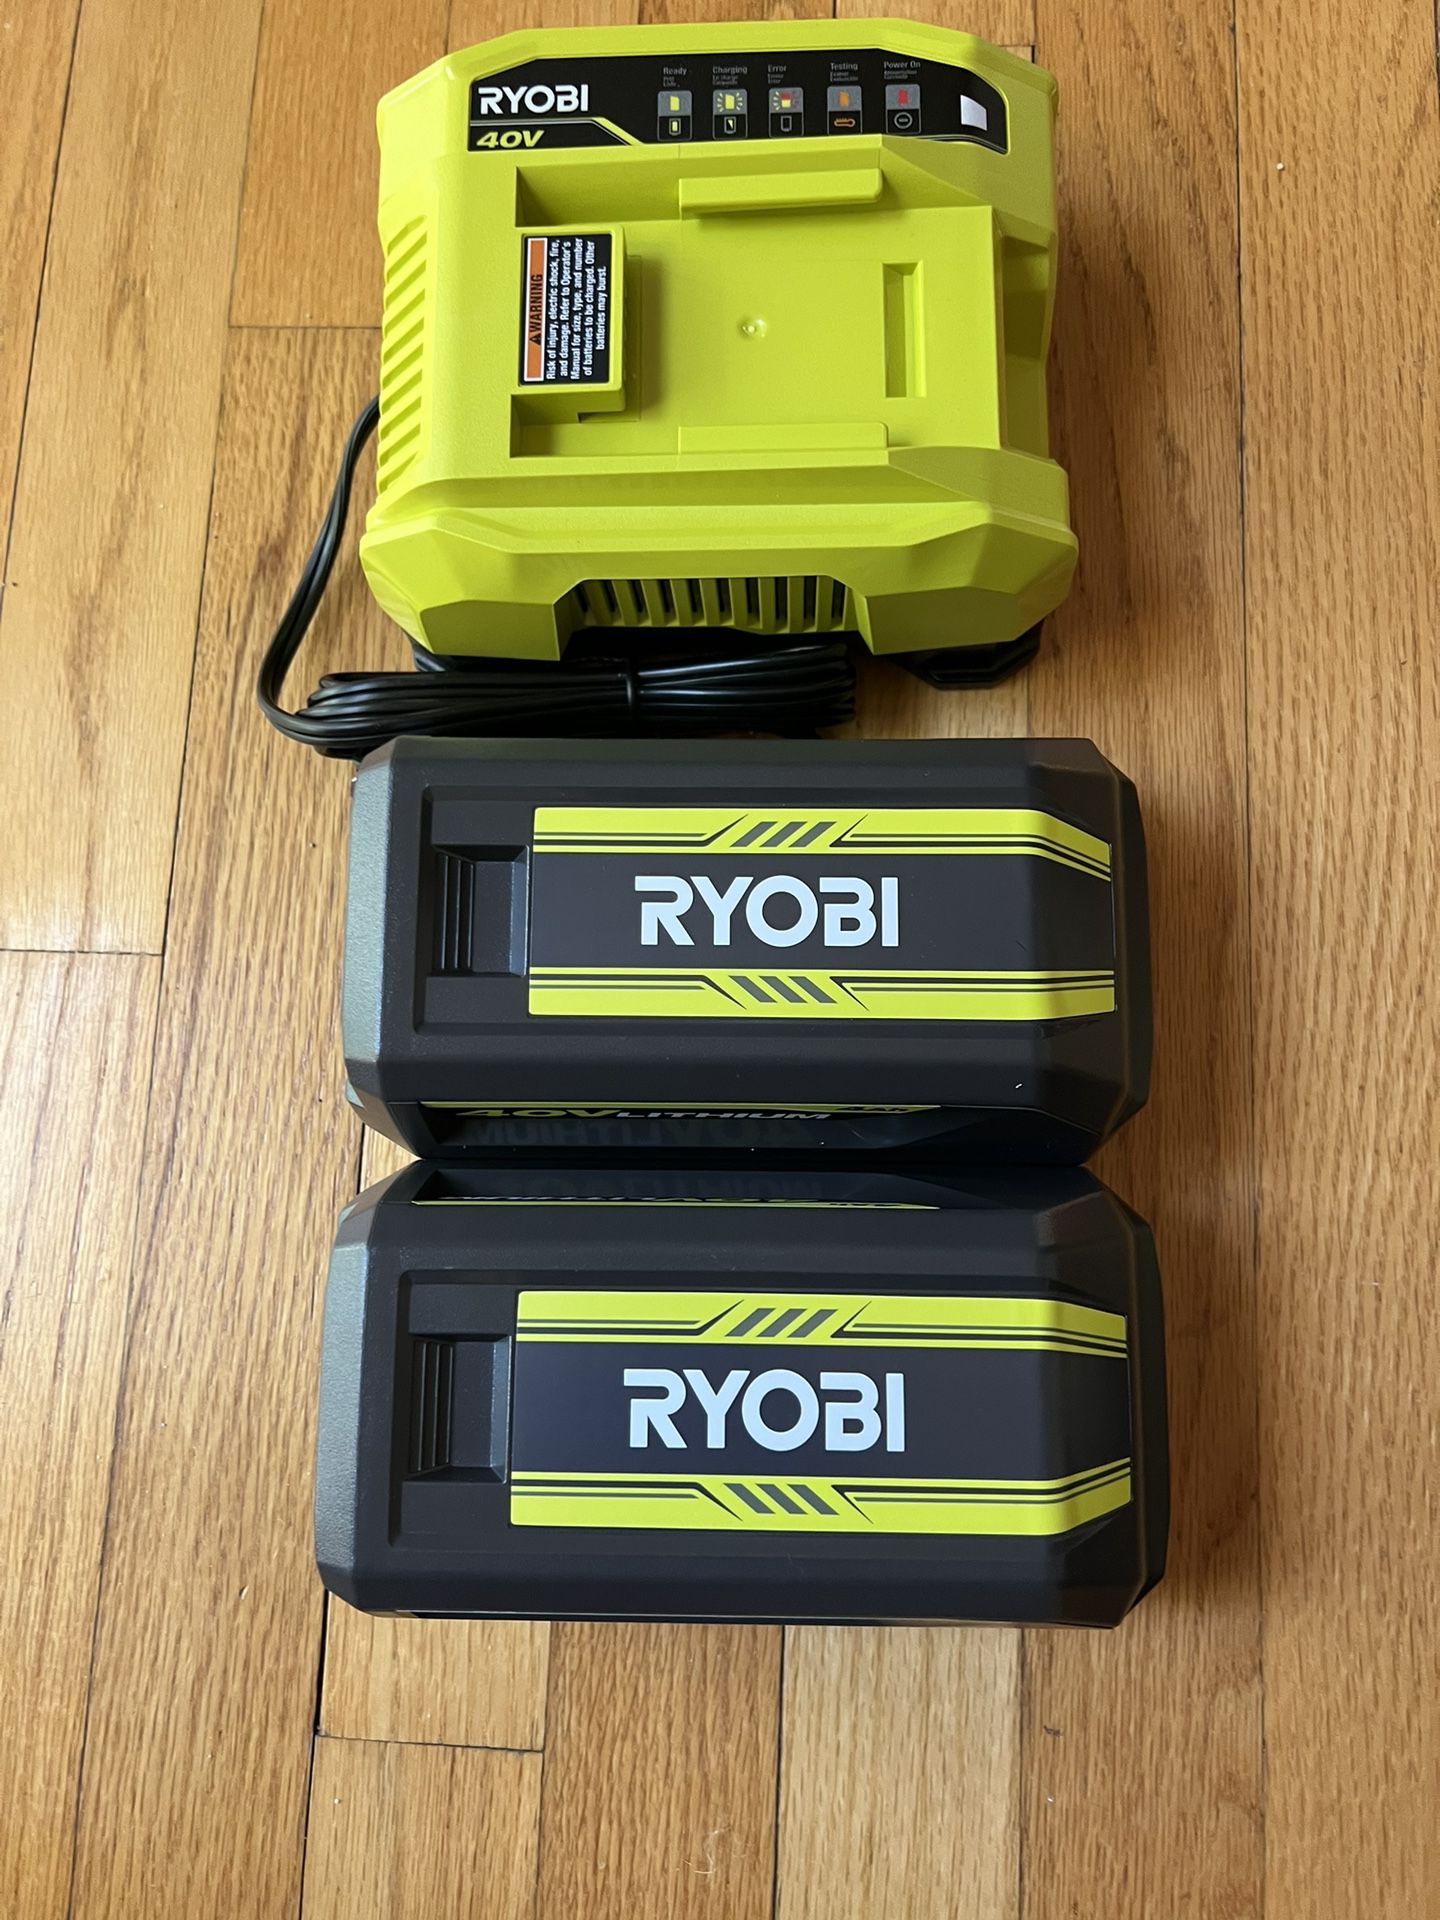 *NEW* Ryobi 40v 4.0Ah battery (2-pack) with Rapid charger